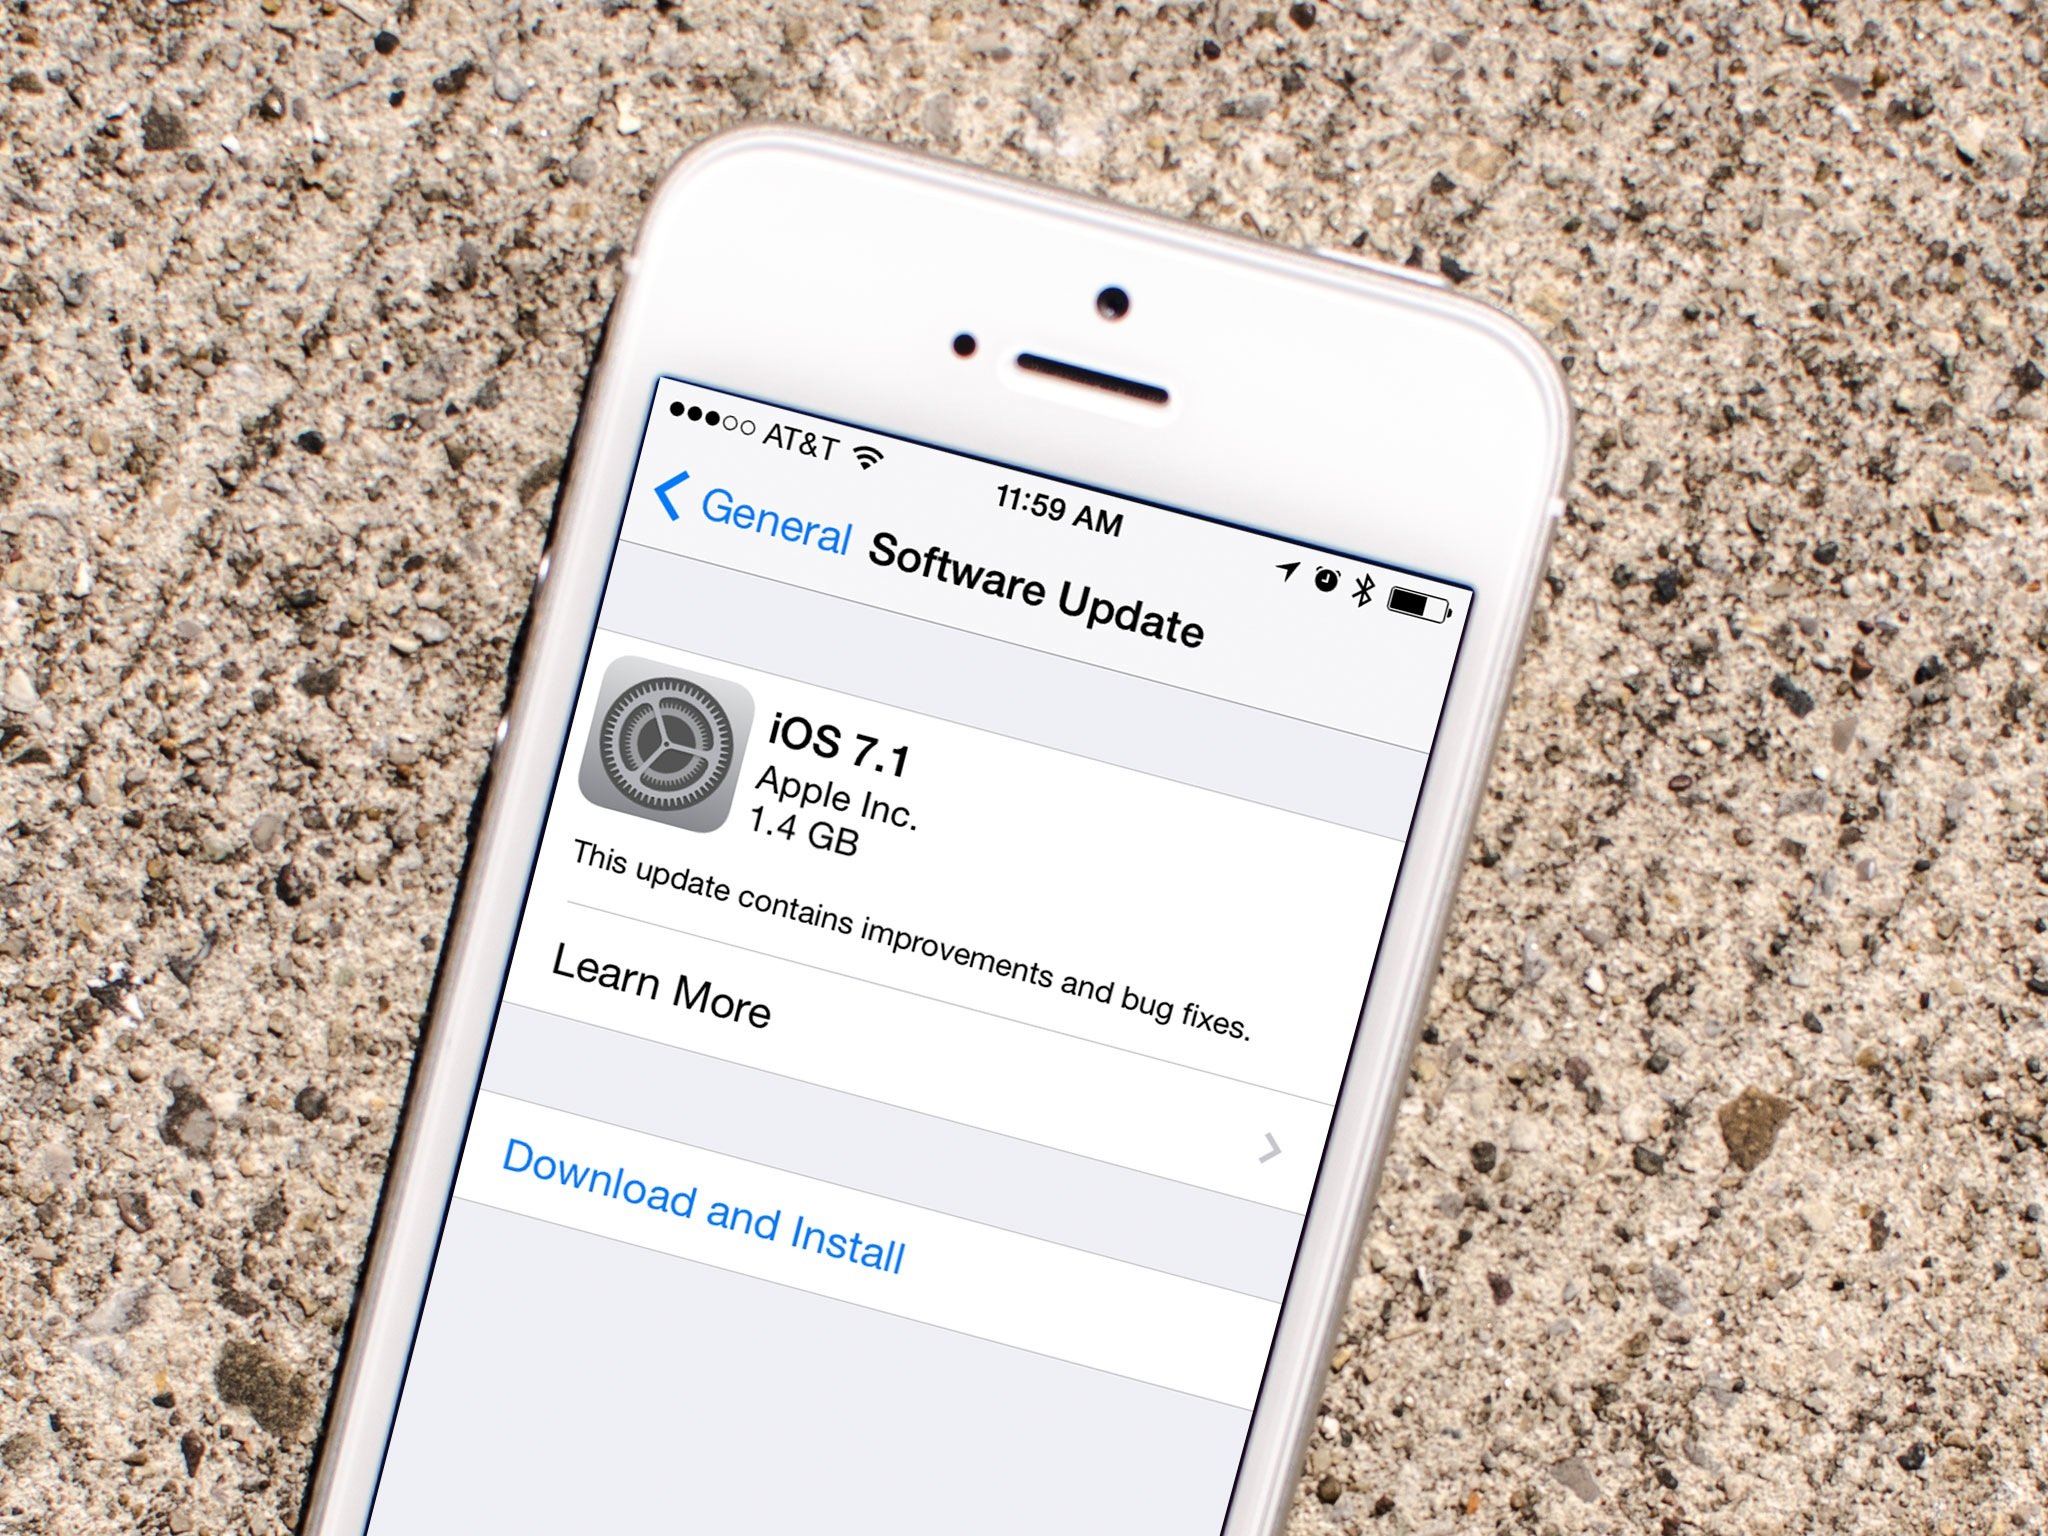 iOS 7.1 is out! Update adds CarPlay support, improves Siri, iTunes Radio, more